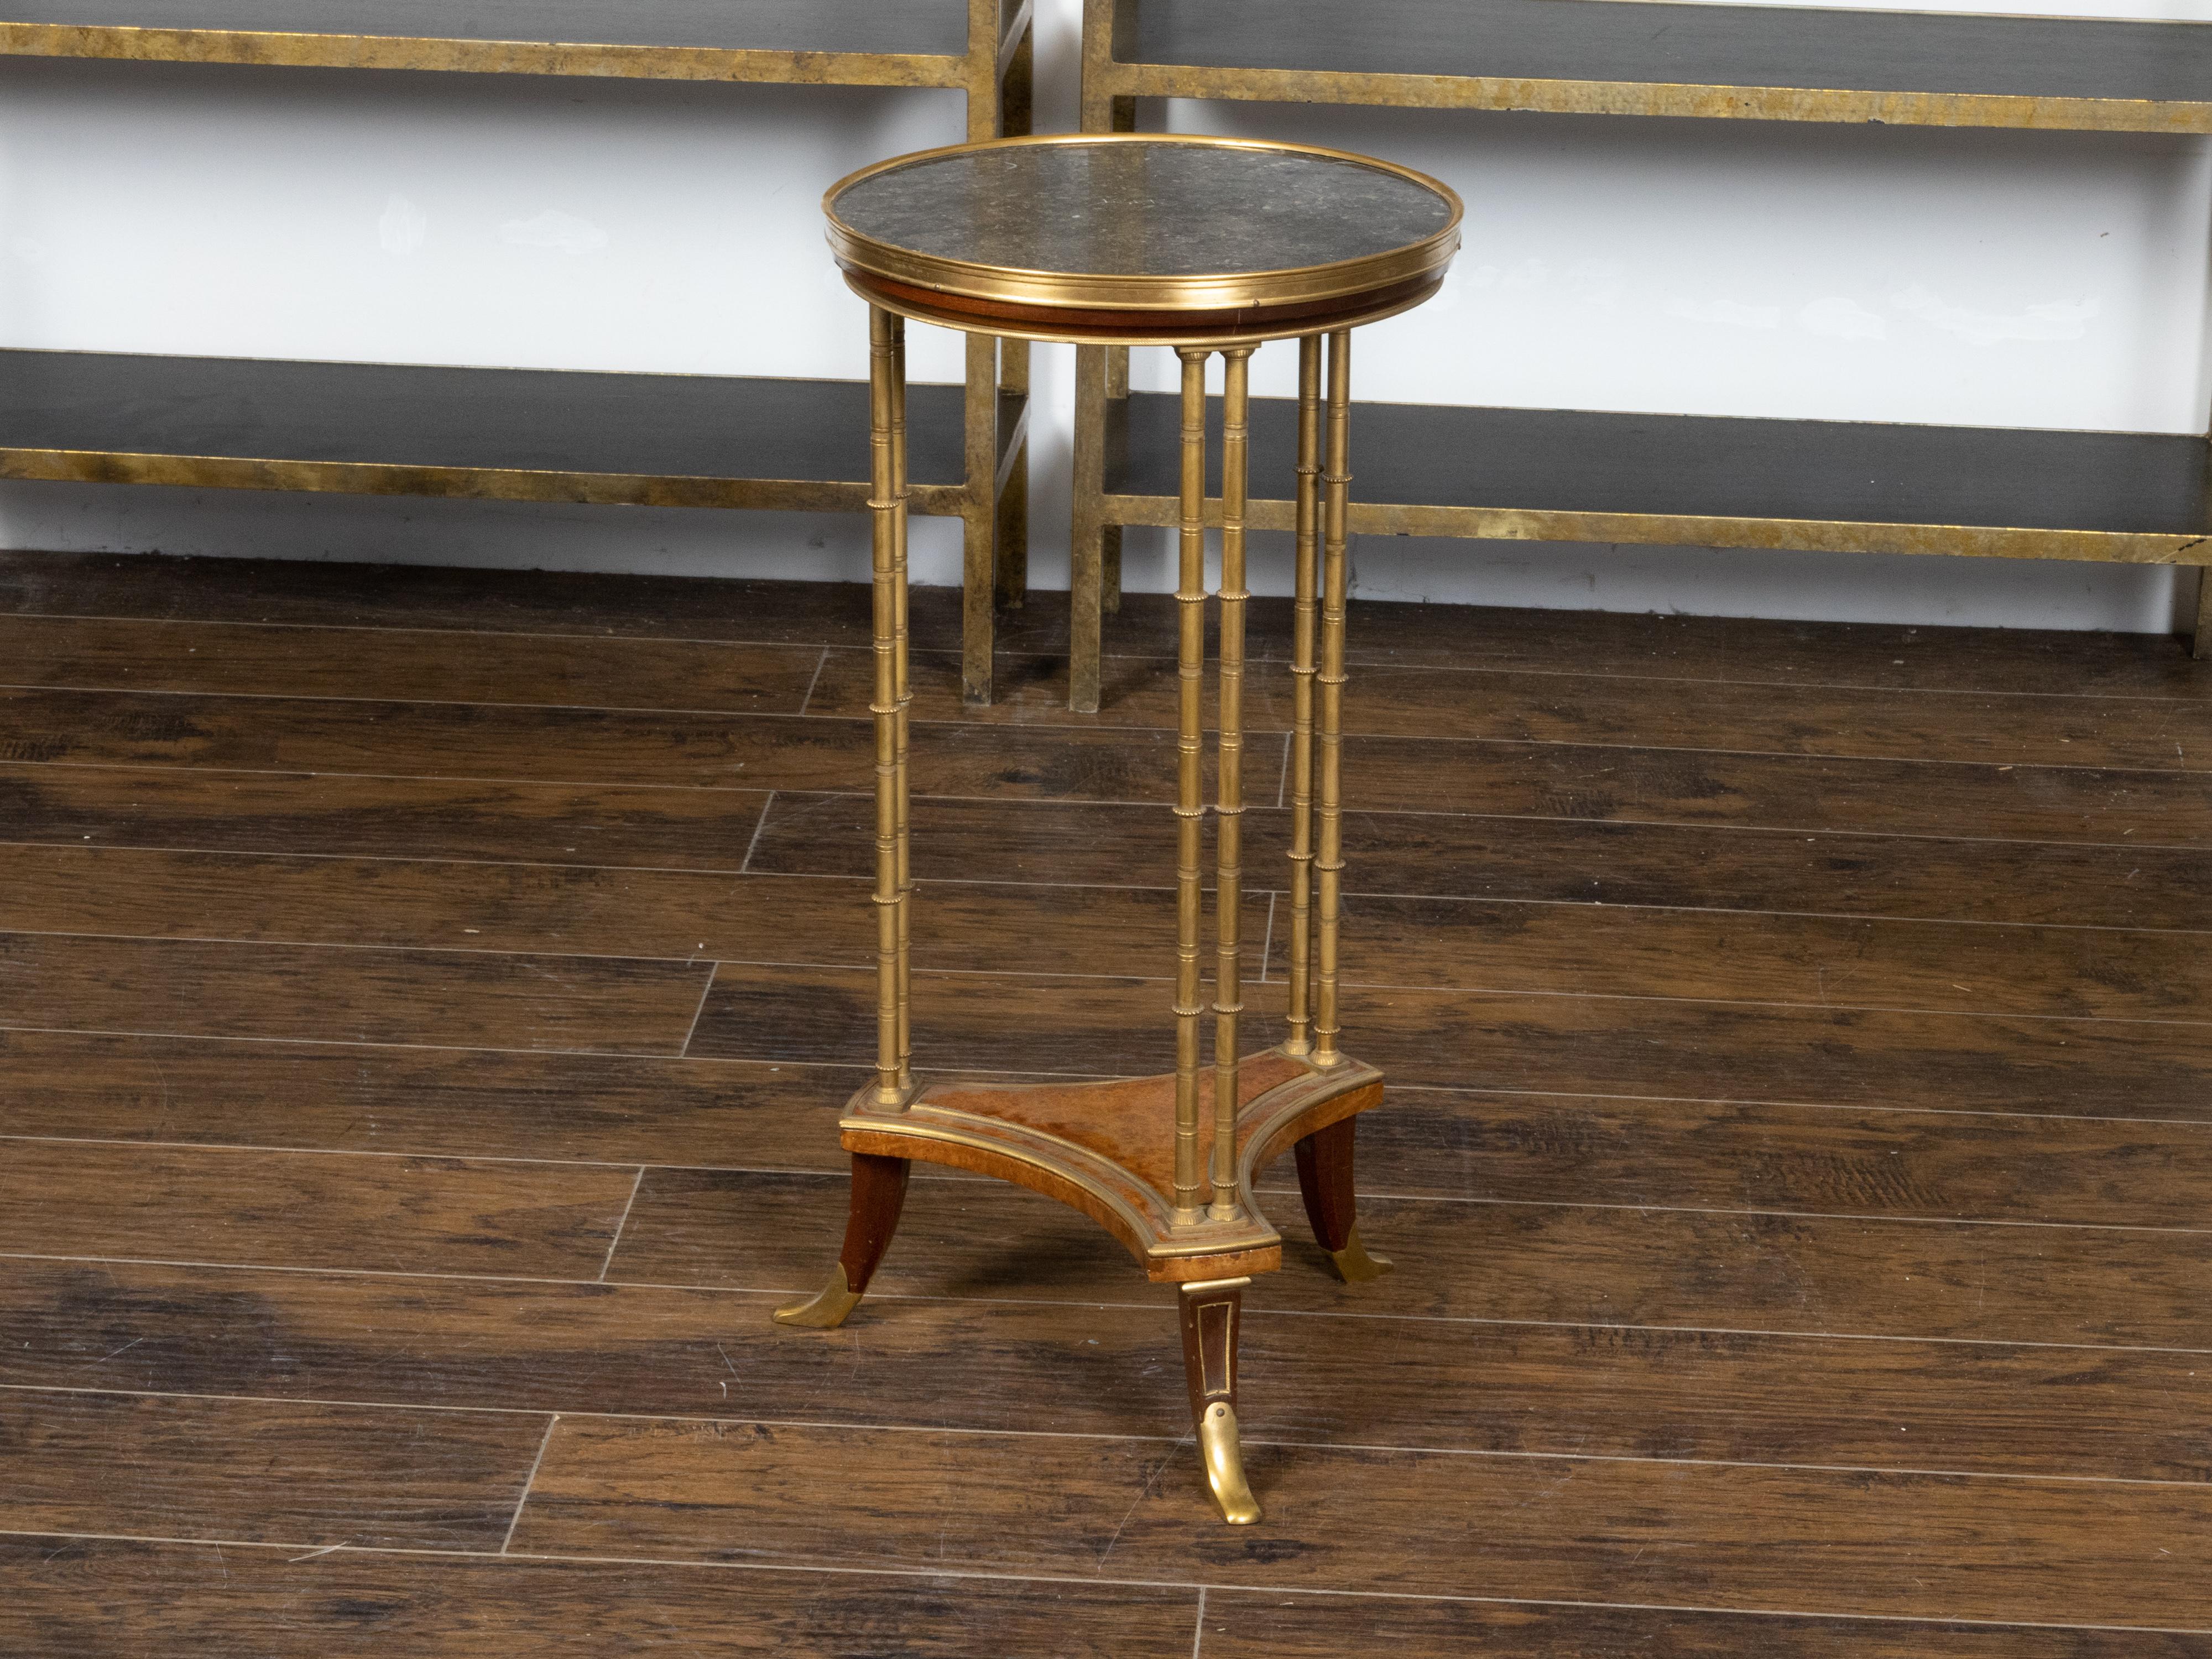 A French bronze guéridon side table from the 19th century with black marble top, faux bamboo legs and burl shelf. Created in France during the 19th century, this bronze guéridon side table features a circular black marble top sitting above a faux